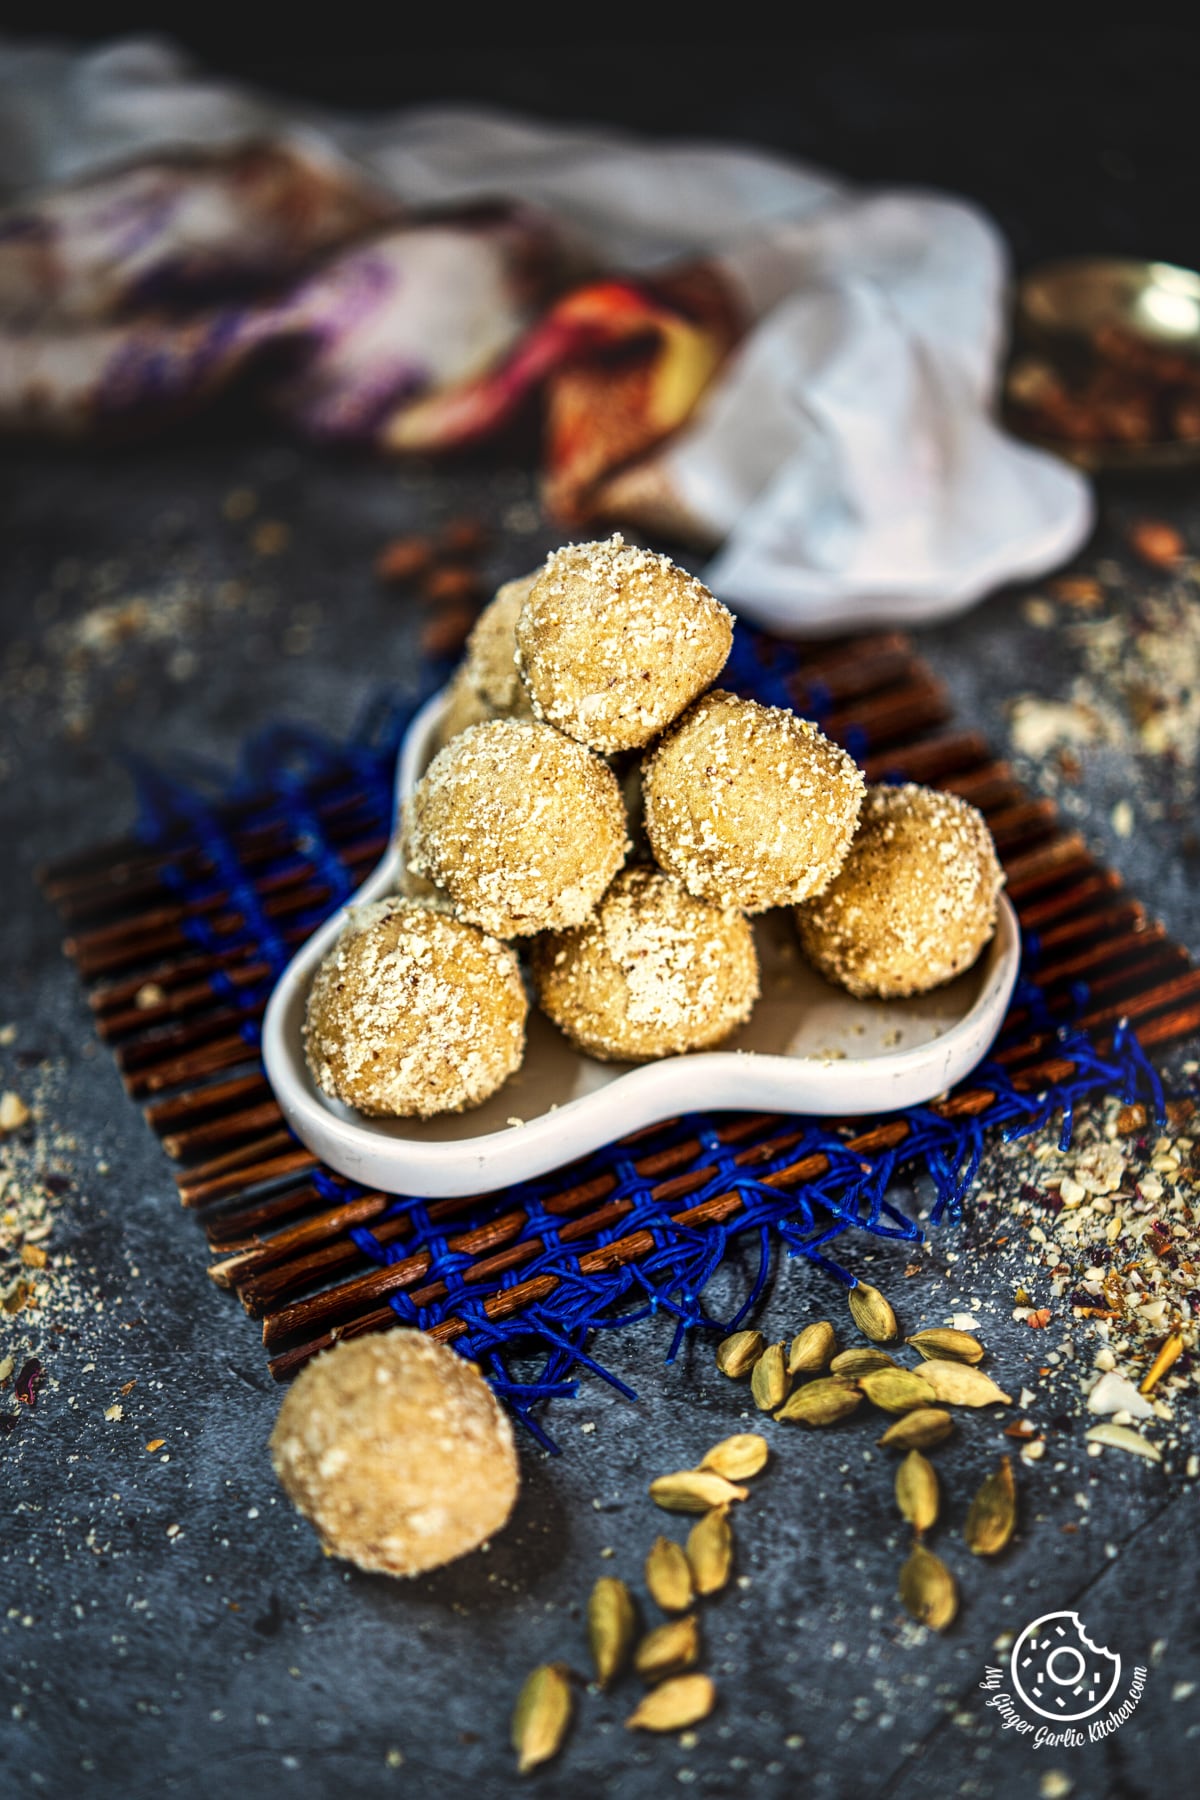 peanut ladoo in a white plate with green cardamom pods on the side